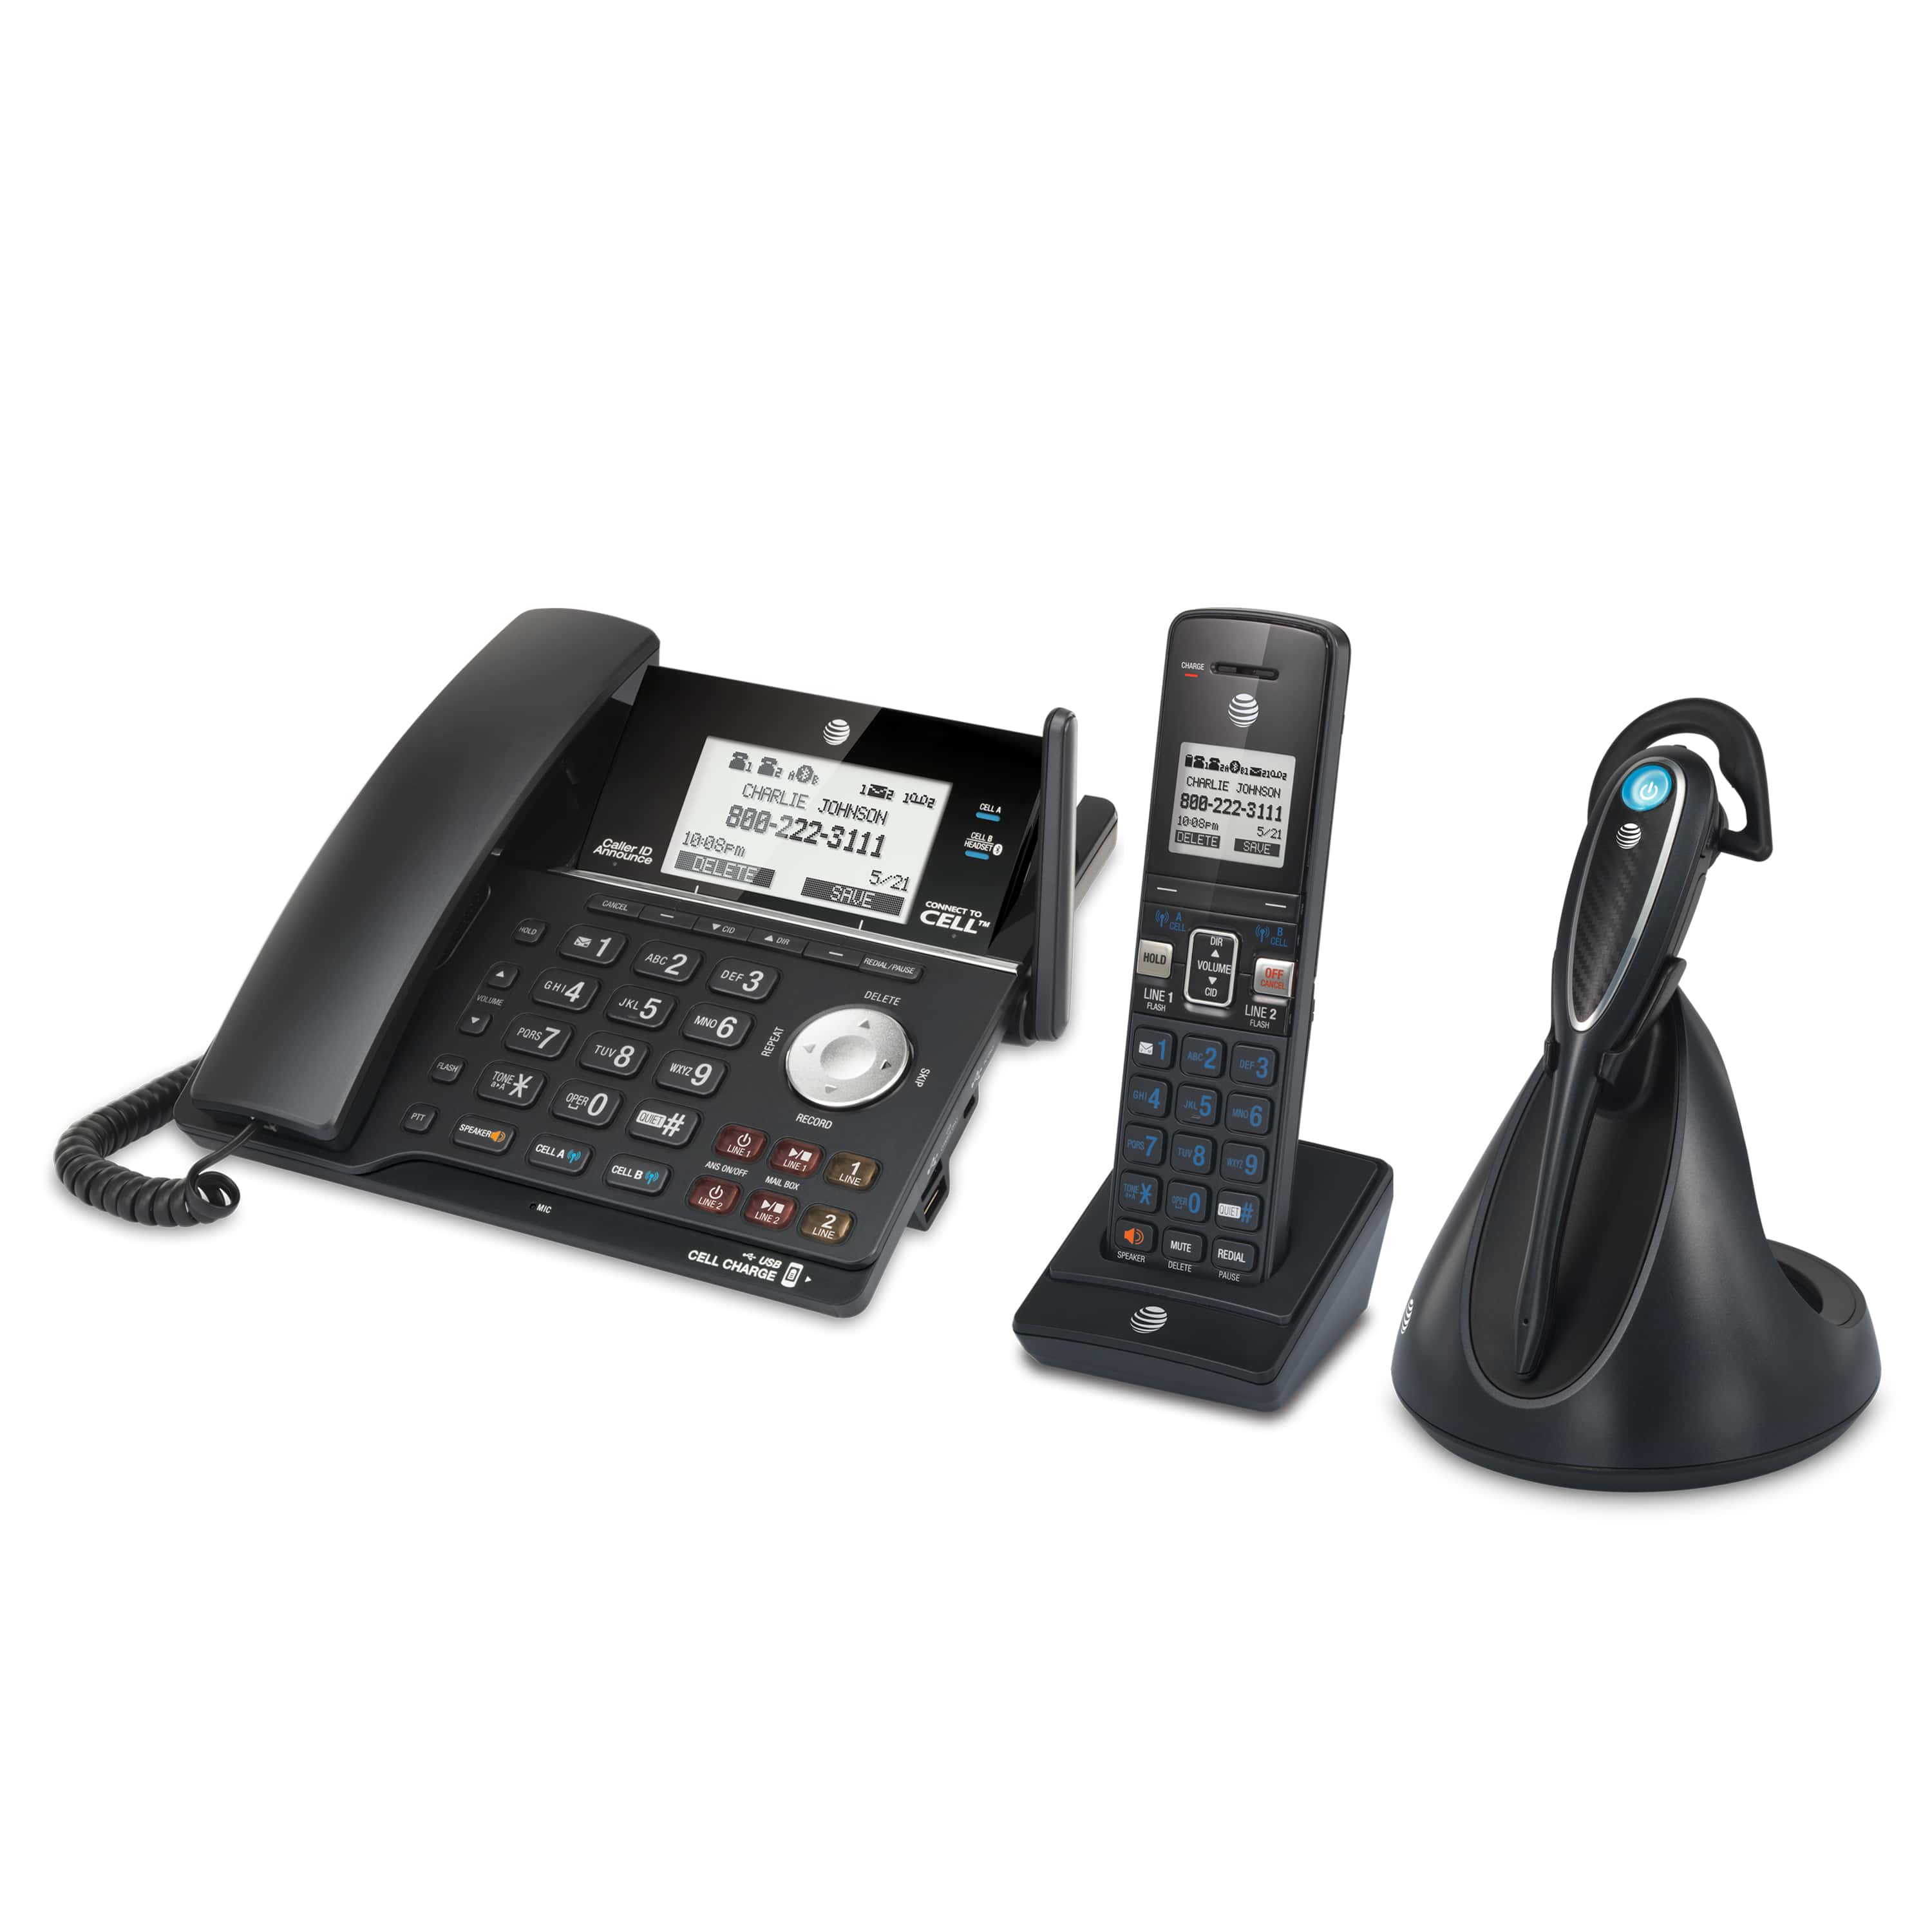 2-line Connect to Cell™ corded/cordless phone system with answering system & cordless headset - view 3